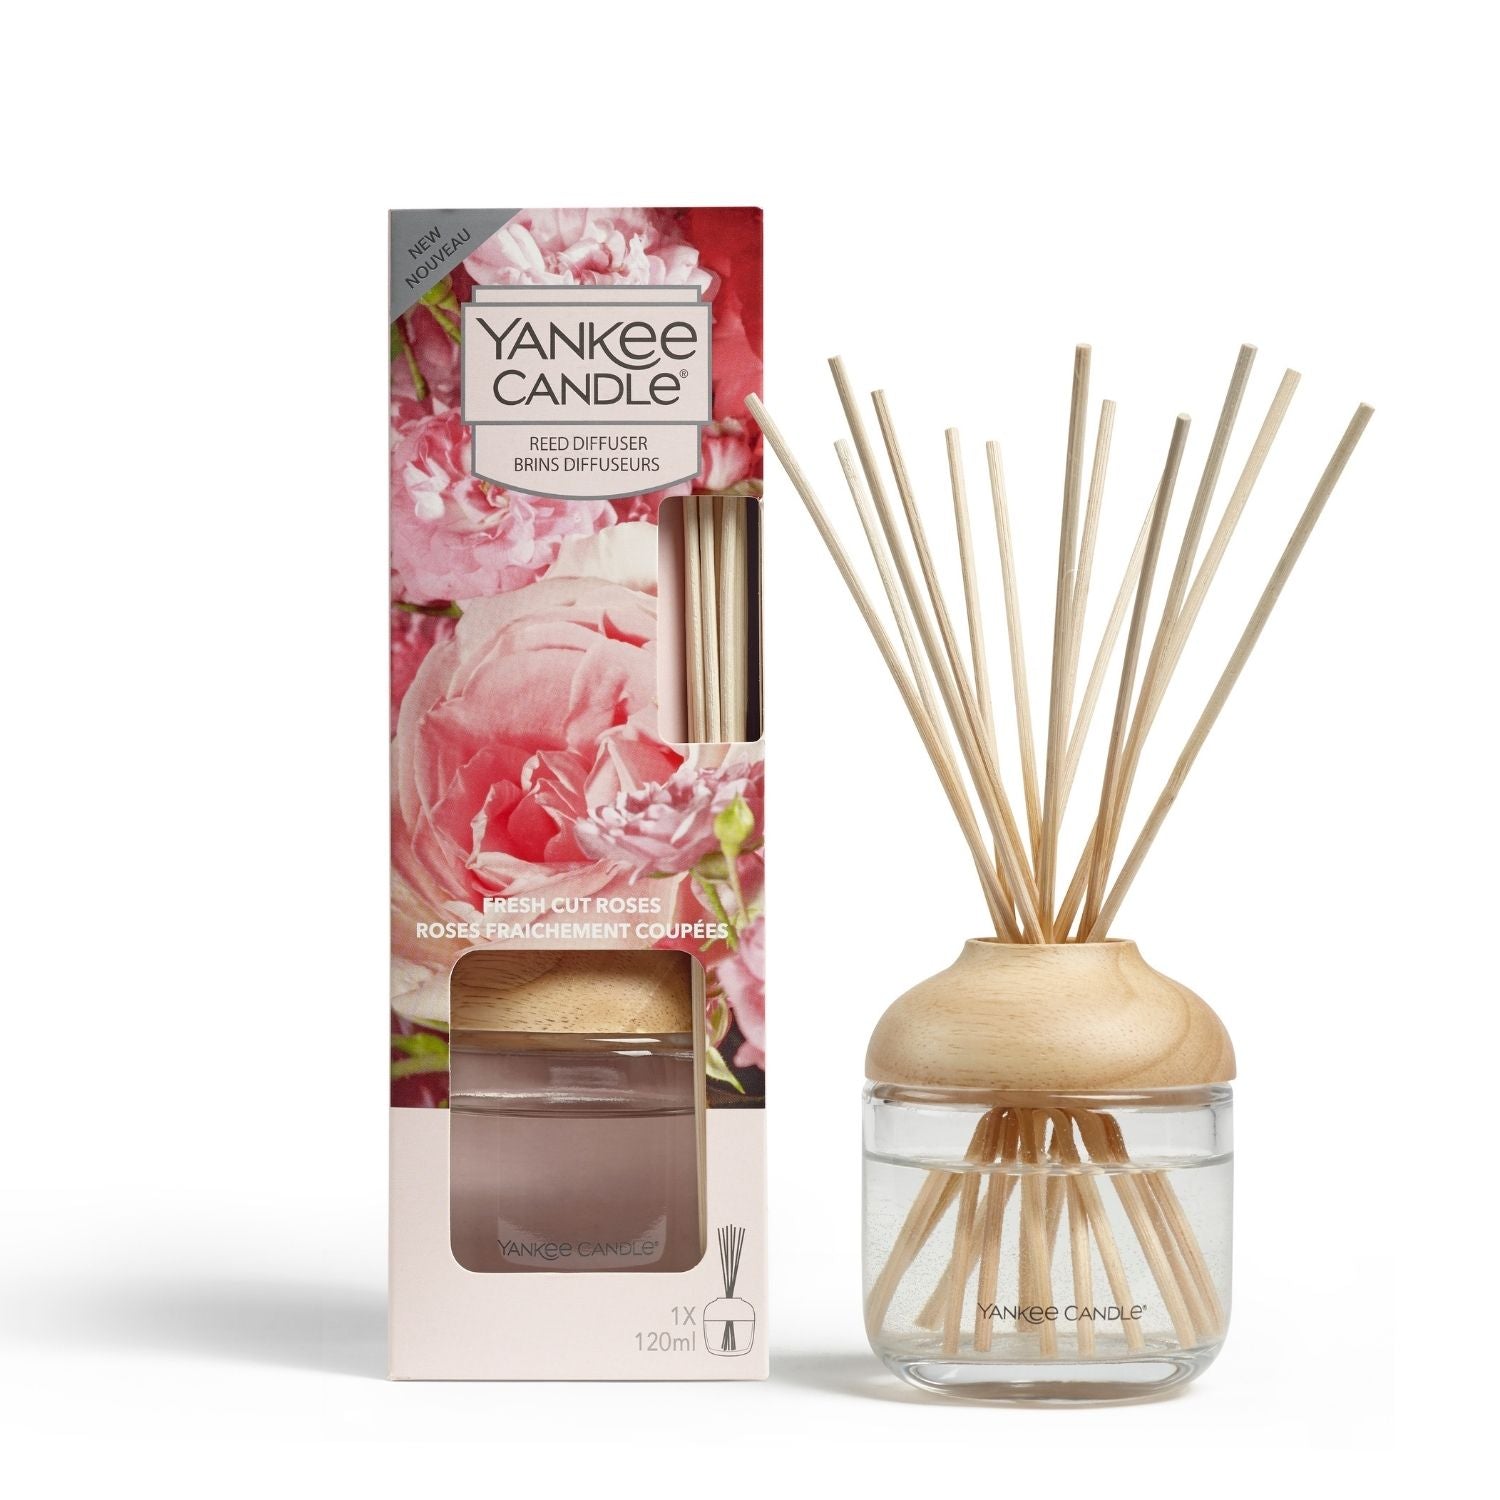 Yankee Candle Reed Diffuser - Freshcut Roses 1 Shaws Department Stores